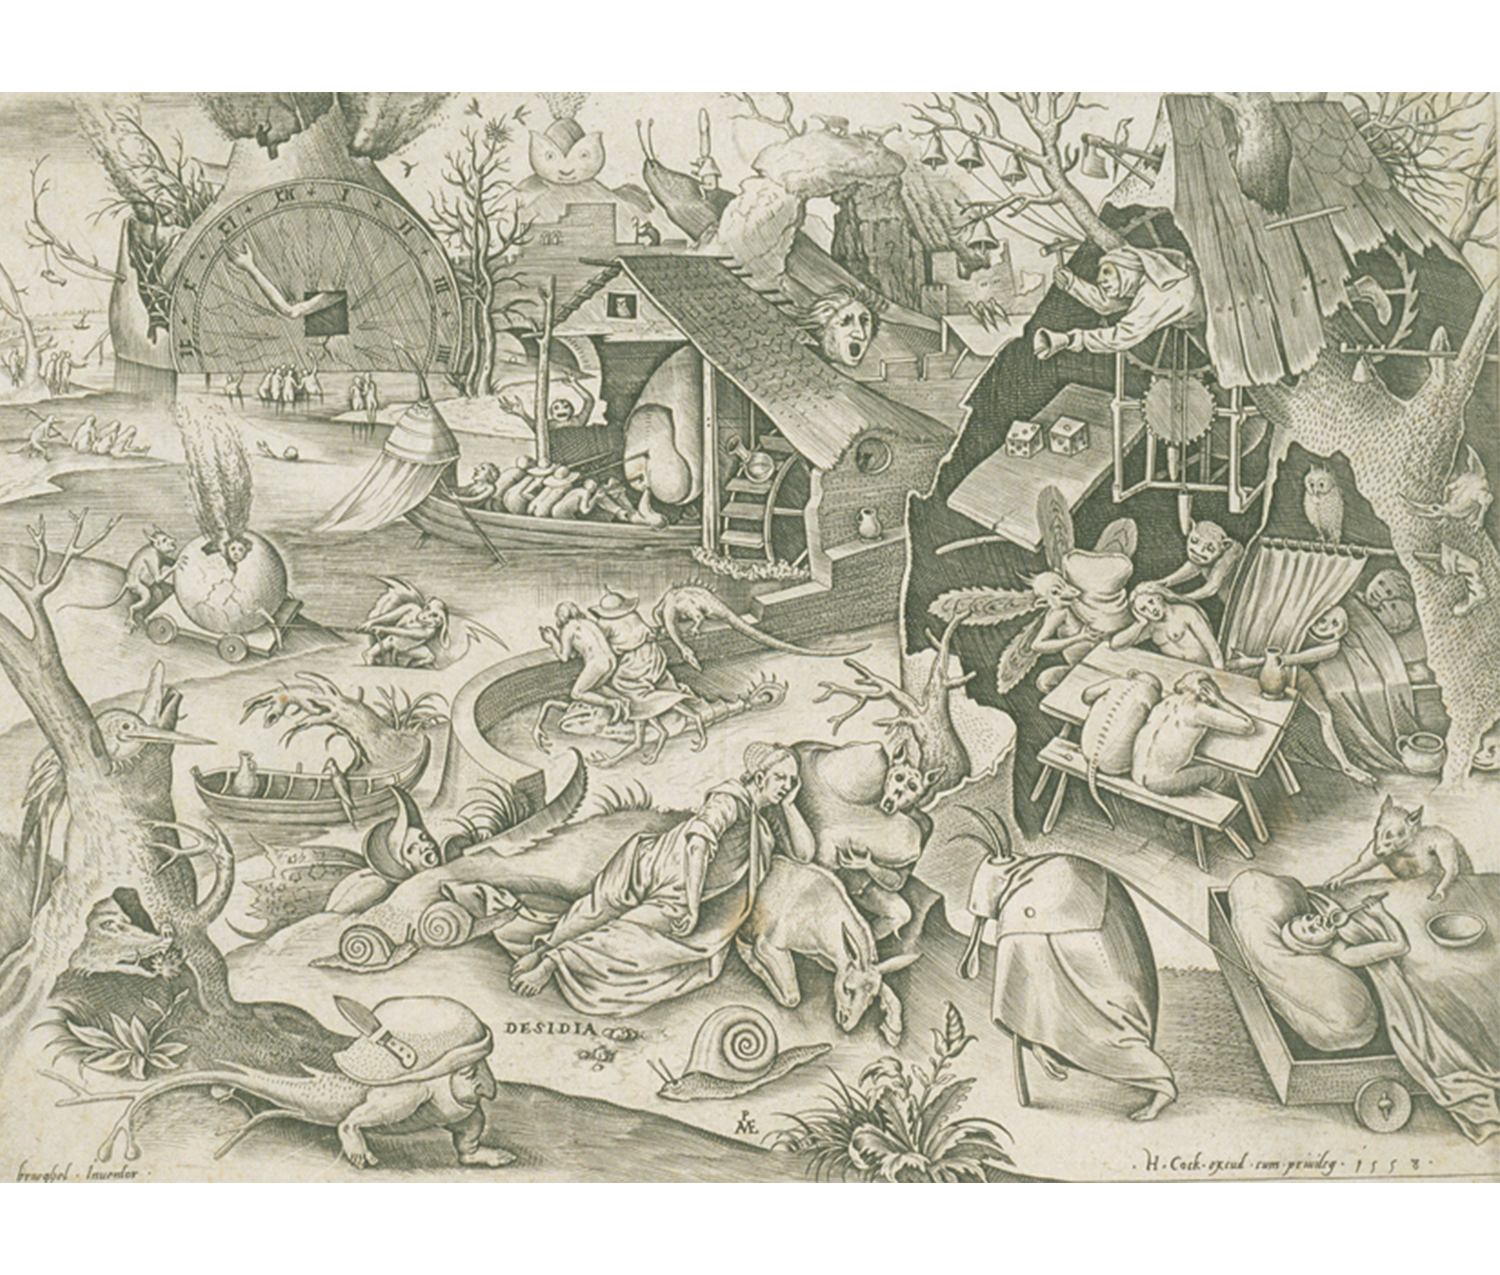 charcoal drawings of beasts, the personifications of the sin Sloth, lounging around among a fantastical landscape